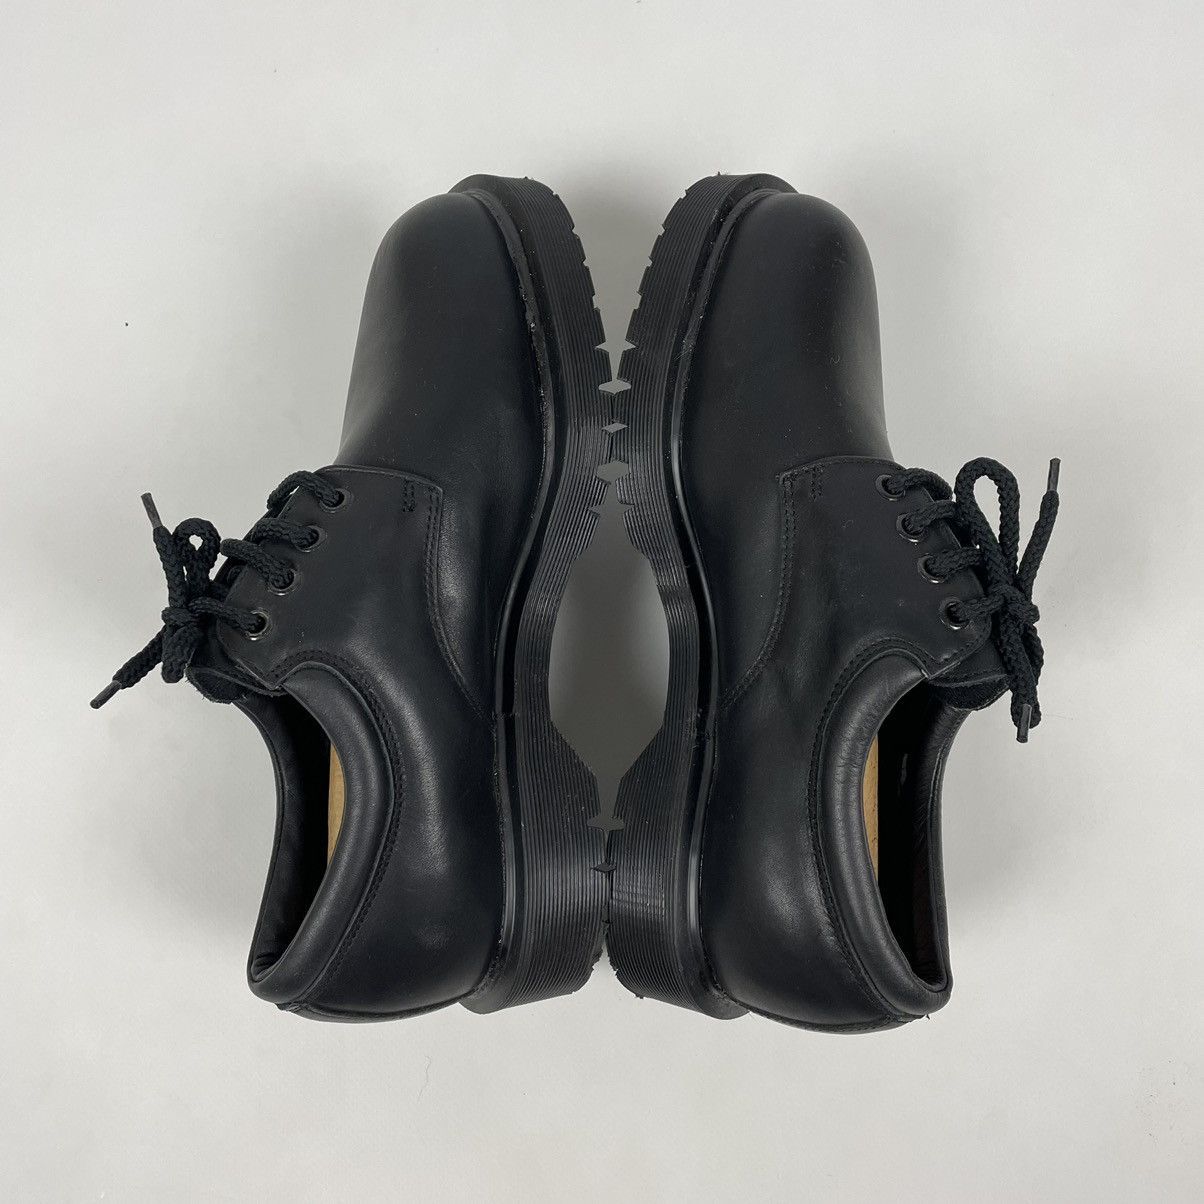 Dr. Martens Vintage Dr. Martens Royal Mail Shoes Made in England Size US 9 / EU 42 - 5 Thumbnail